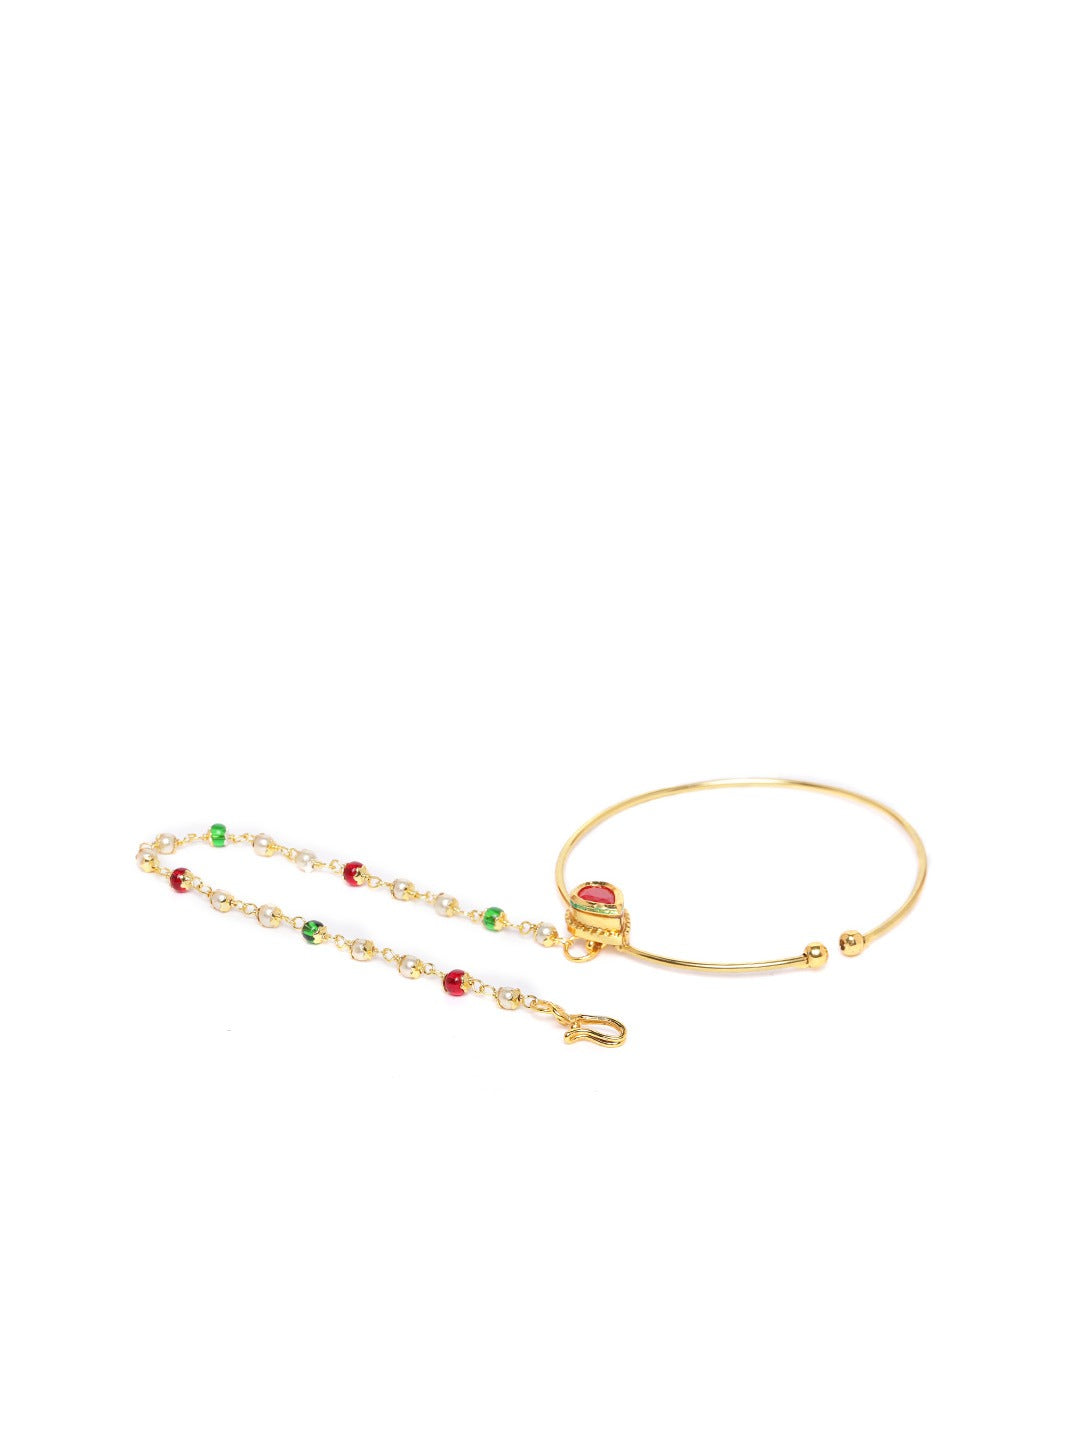 Red & Green Gold-Plated CZ-Studded & Beaded Handcrafted Chained Nose Ring